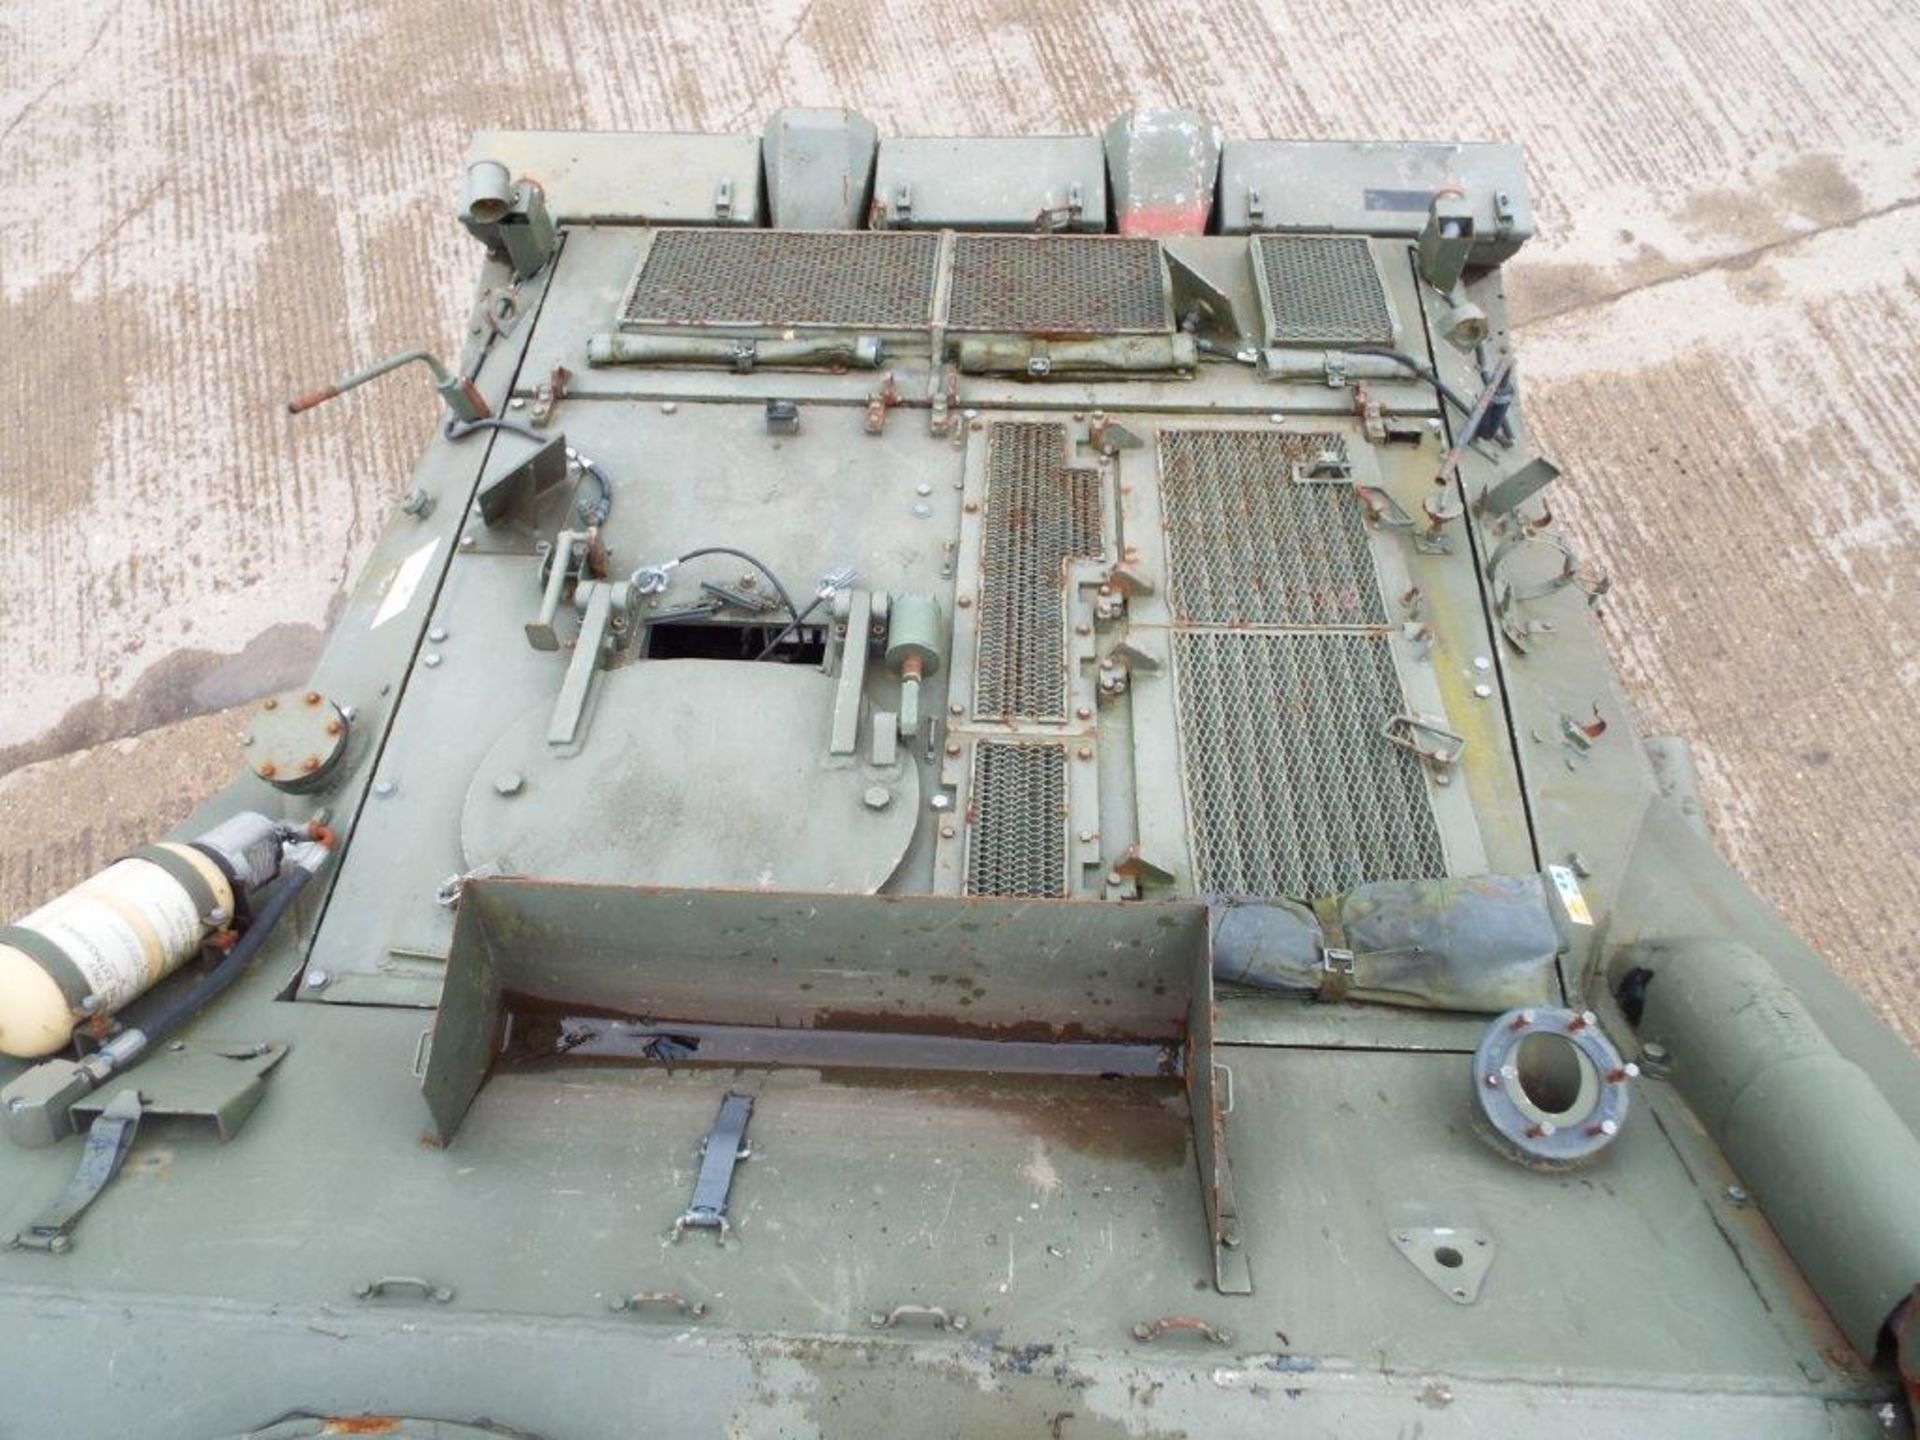 CVRT (Combat Vehicle Reconnaissance Tracked) FV105 Sultan Armoured Personnel Carrier - Image 14 of 32